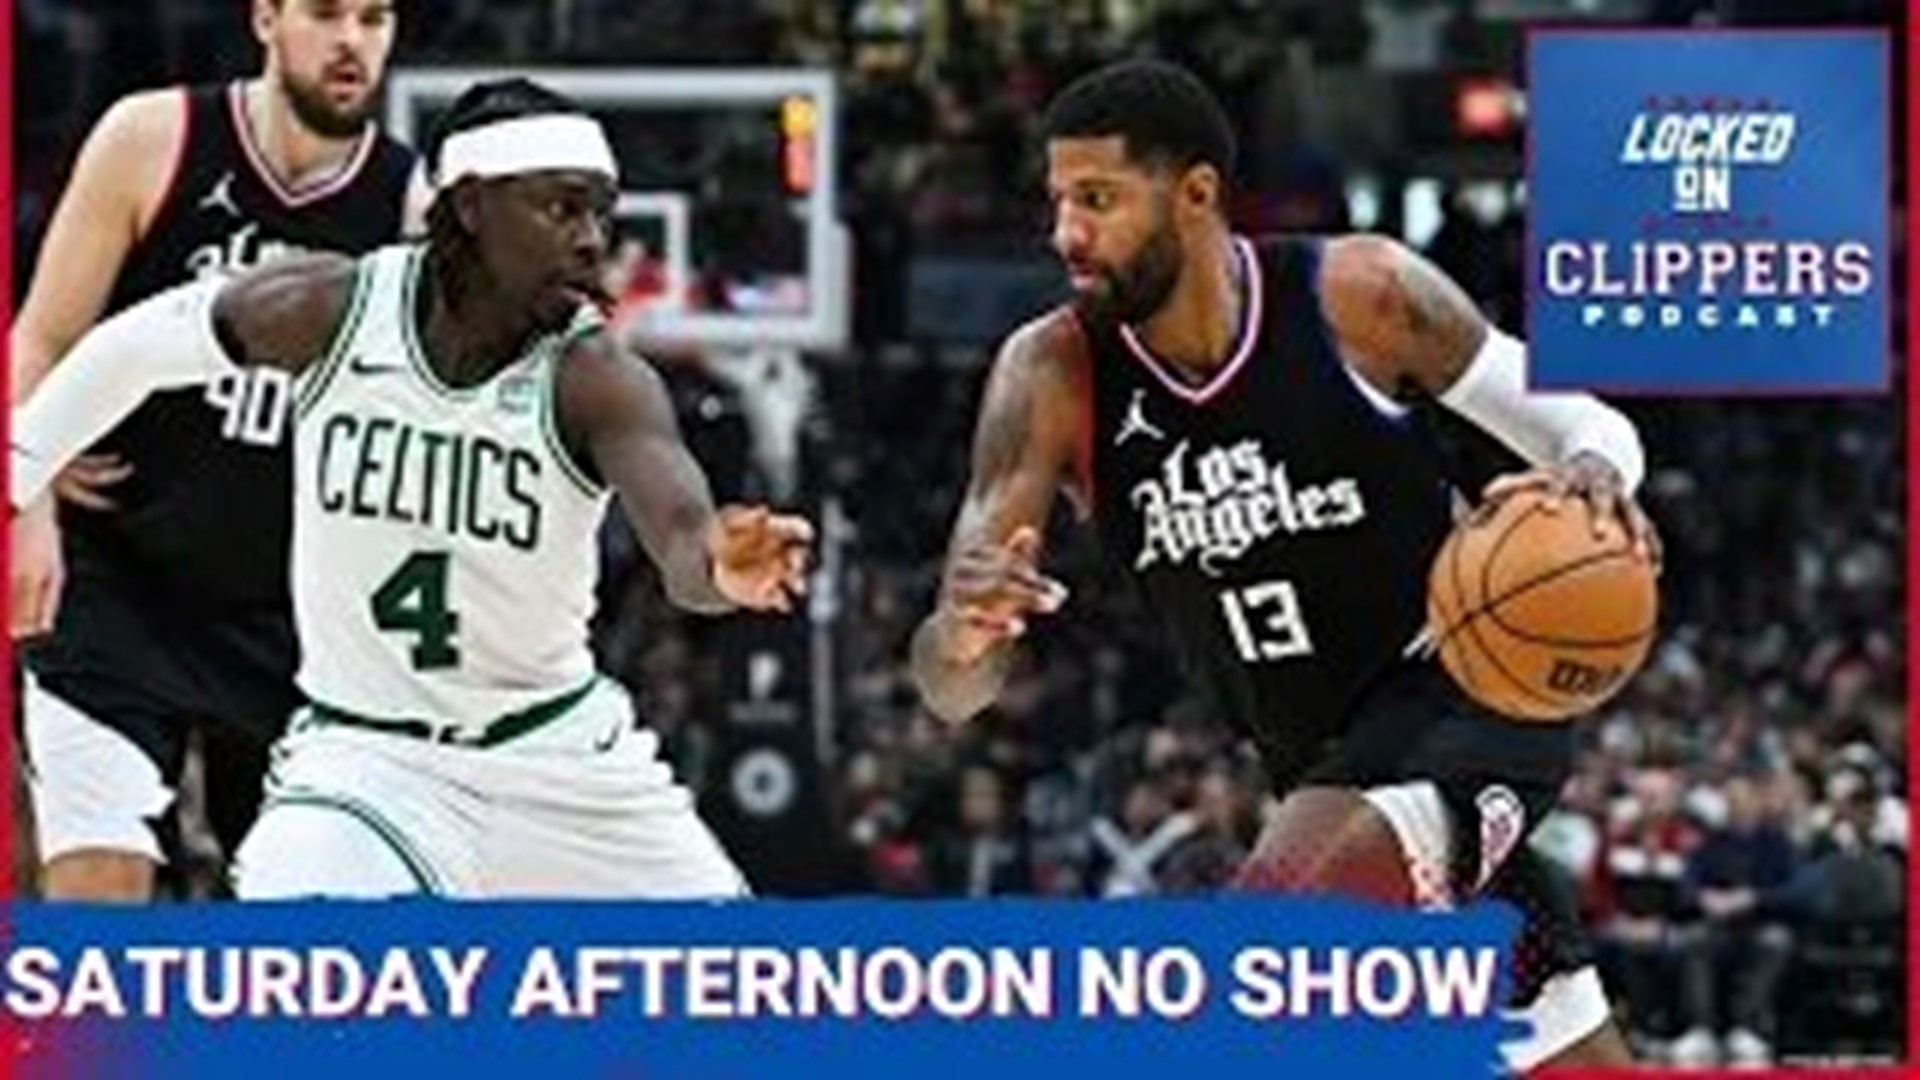 The LA Clippers faced the Boston Celtics on Saturday Afternoon in what was expected to be a high intensity finals that both sets if fans are hoping leads to a finals